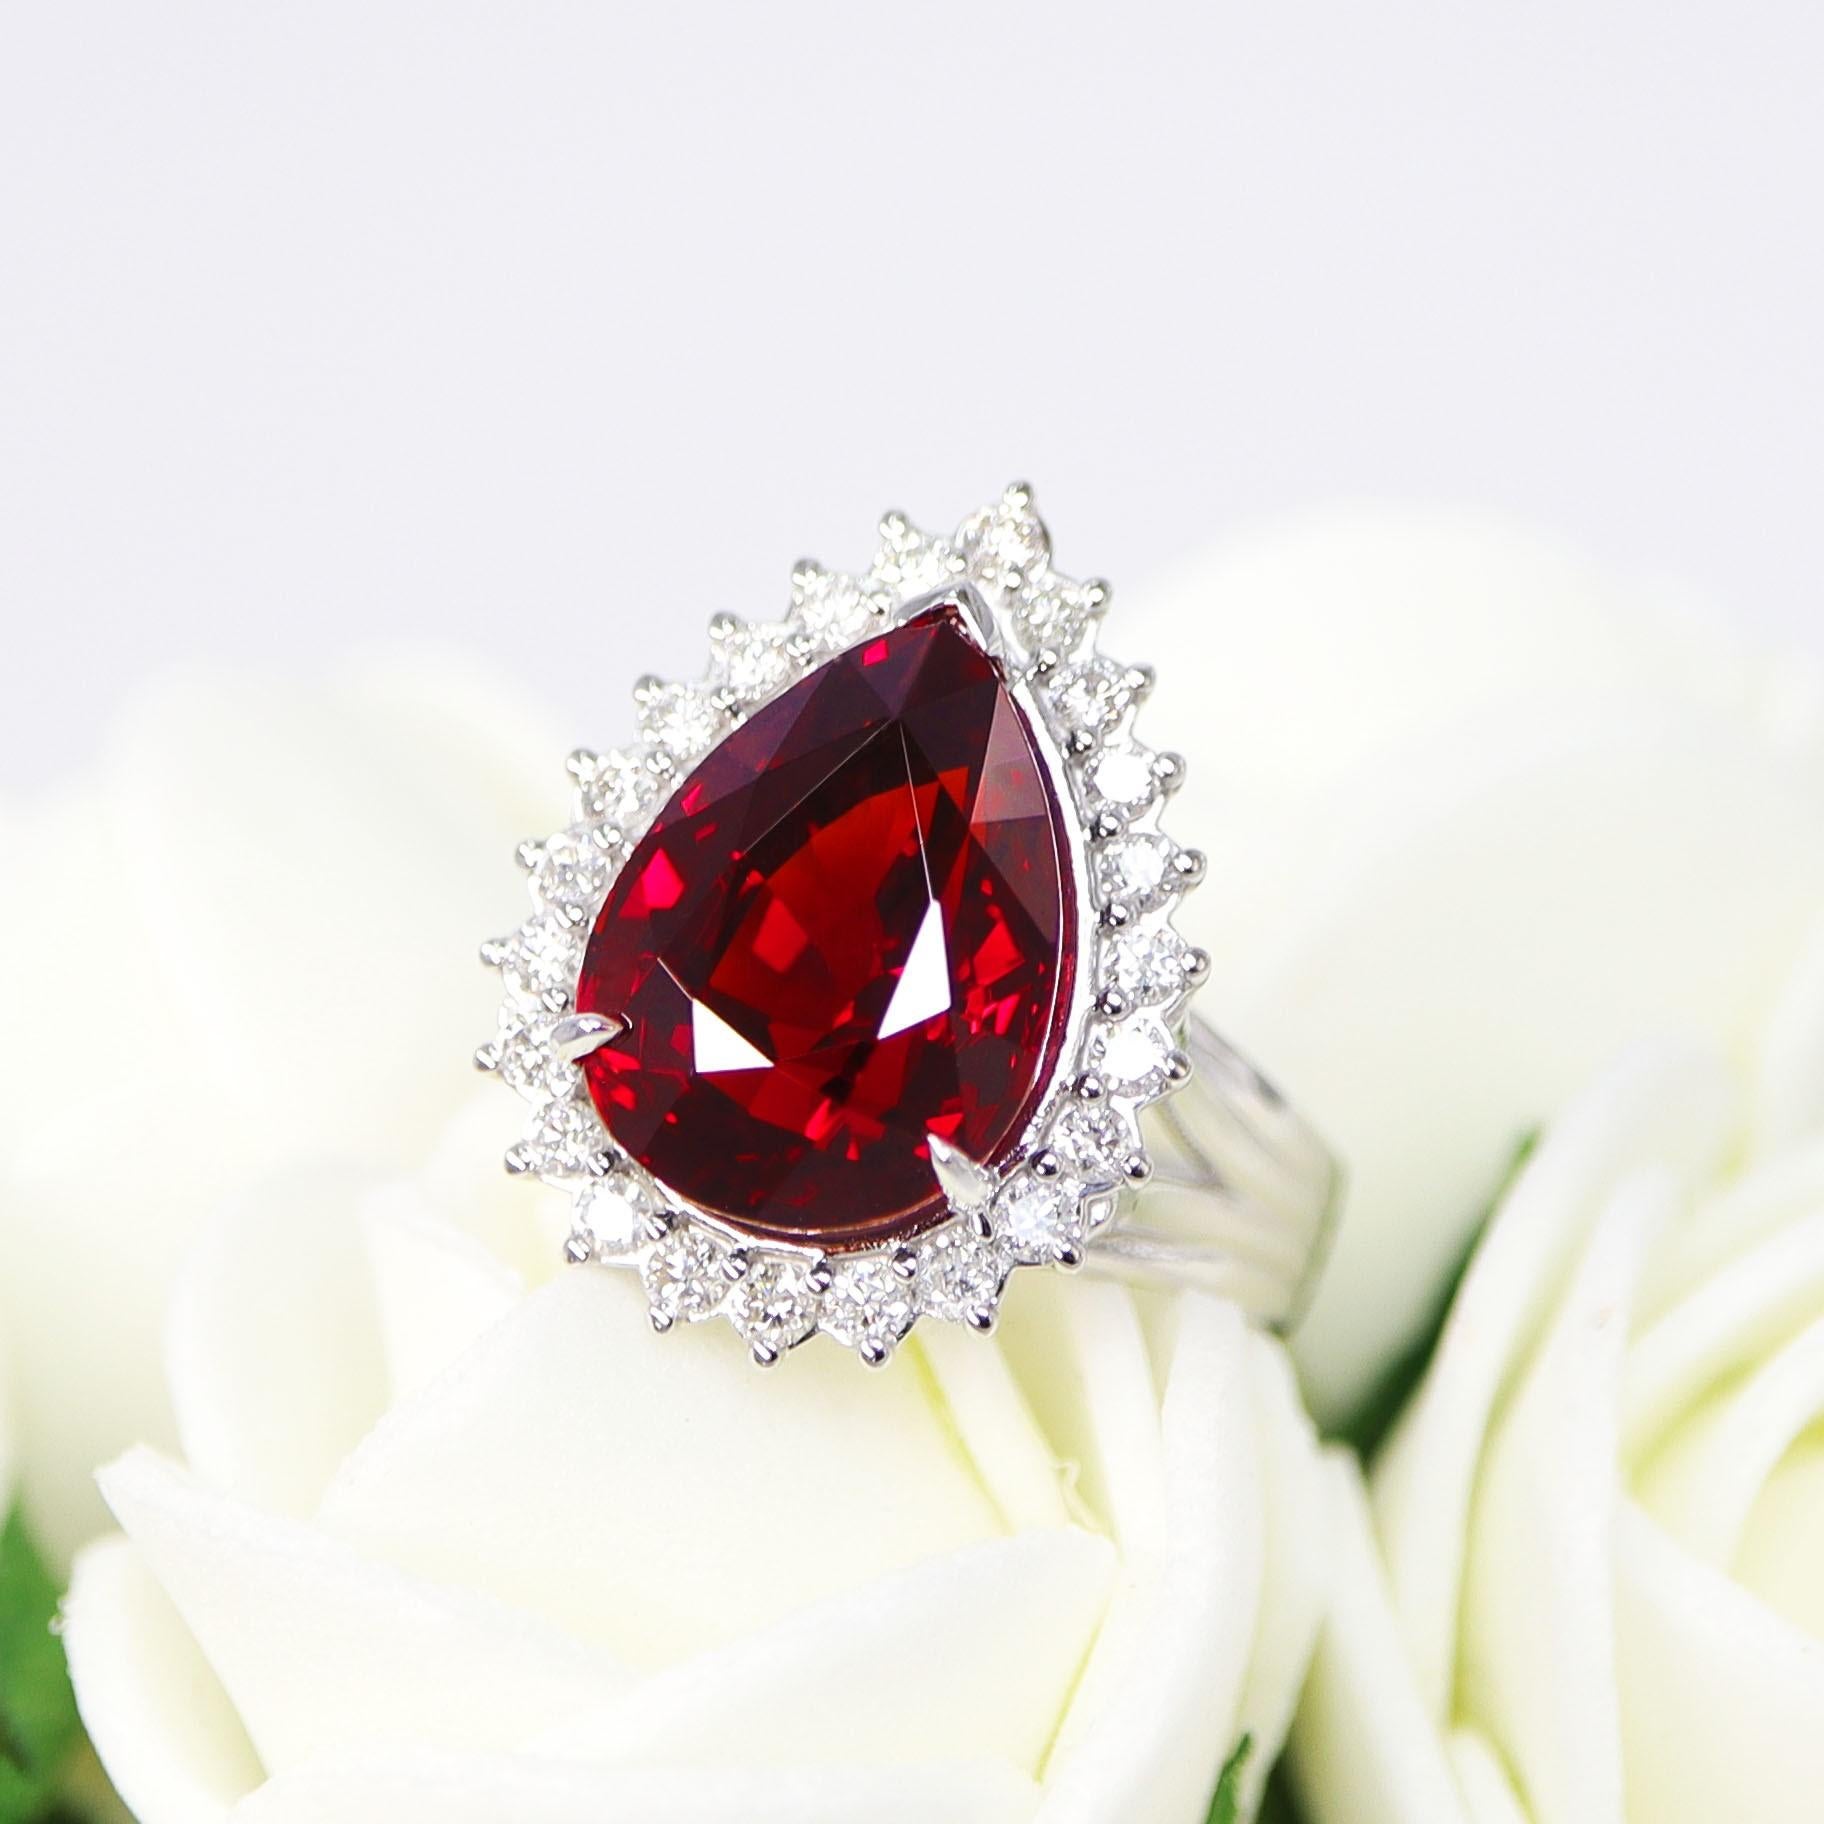 *GIA certified 14K White Gold 9.12 Ct Pigeon Blood Red Garnet&Diamonds Engagement Ring **

Natural top-quality Pigeon Blood Red Garnet weighing 9.12 ct set on the 14K white gold split design band with FG VS natural round brilliant cut diamonds